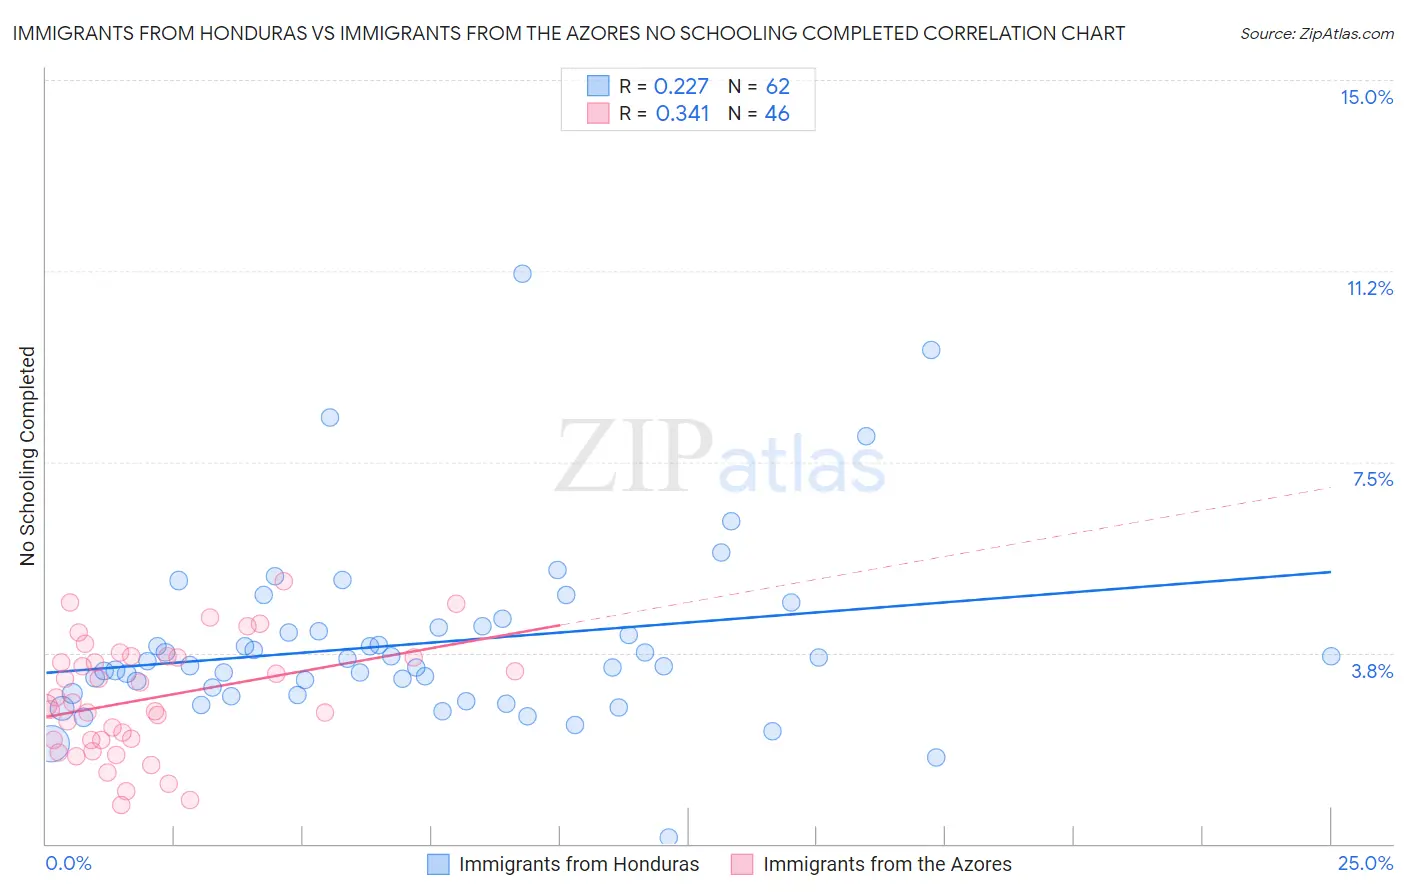 Immigrants from Honduras vs Immigrants from the Azores No Schooling Completed